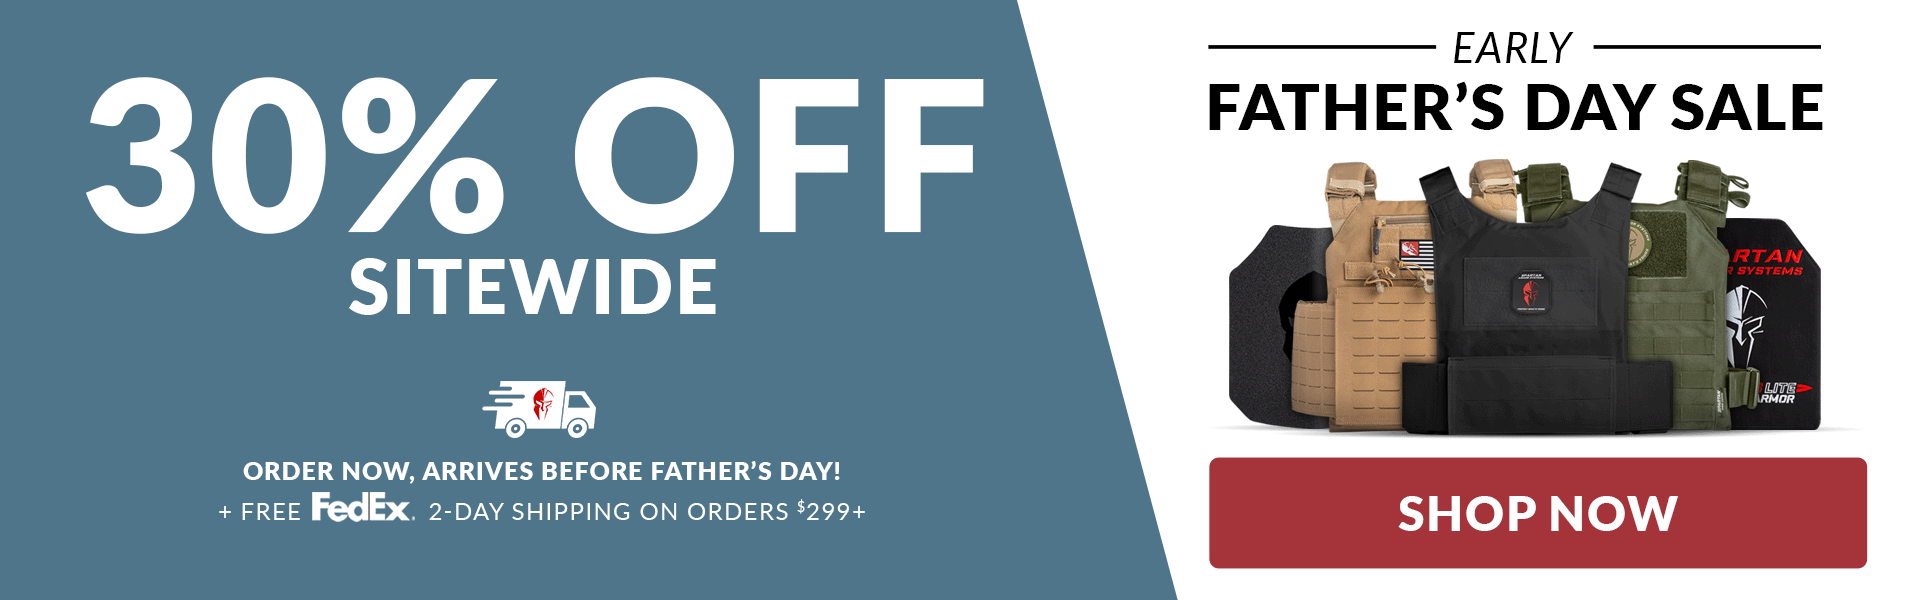 Early Father&#039;s Day Sale - up to 30% Off Sitewide